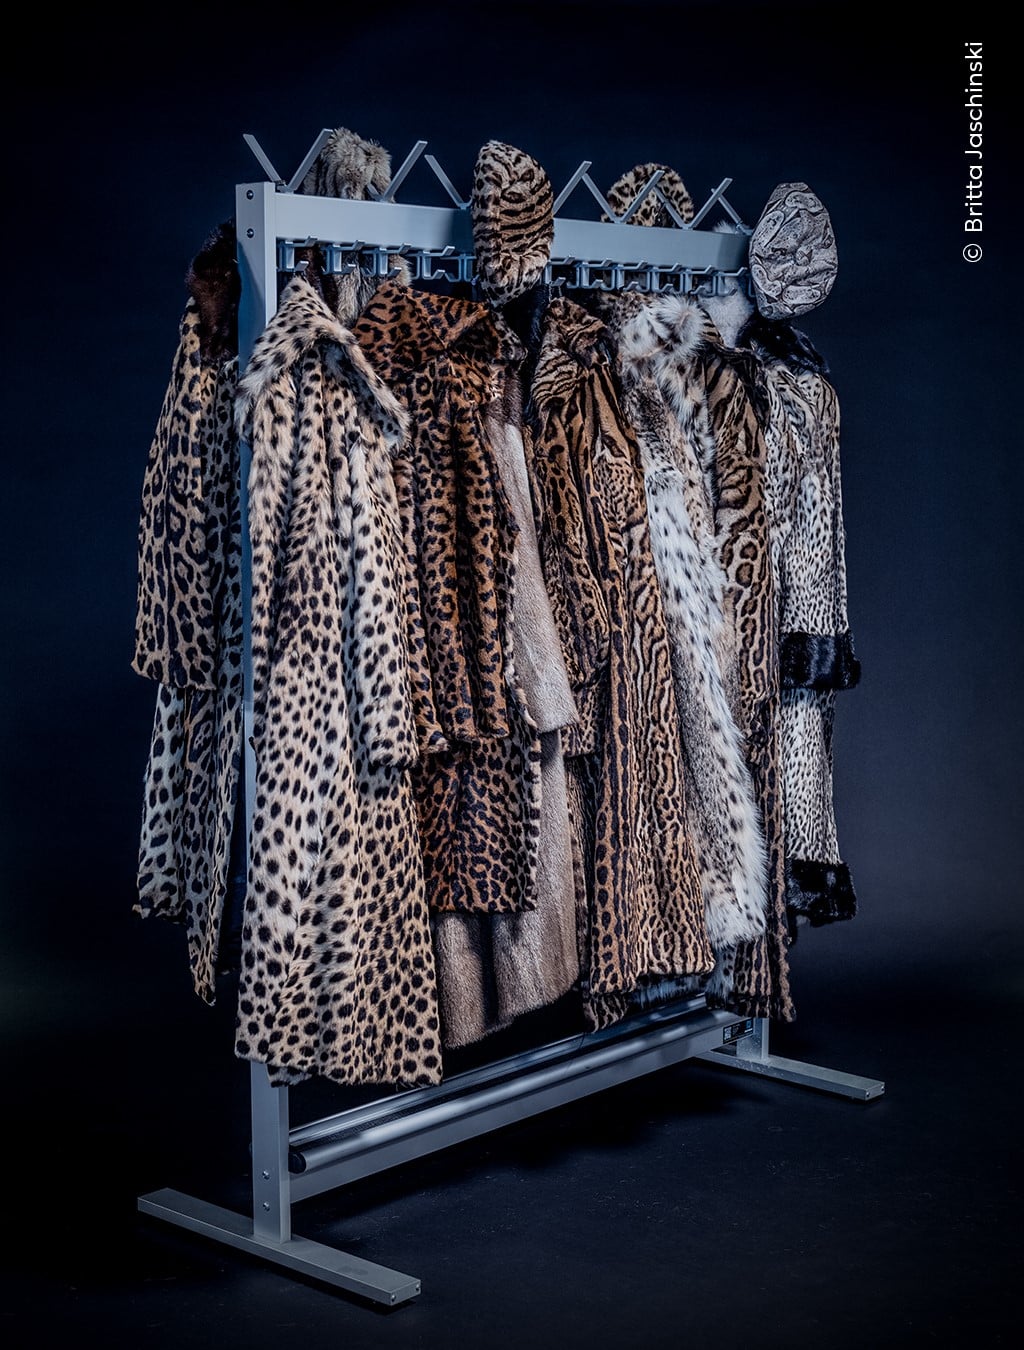 Rack of fur coats made from endangered big cats